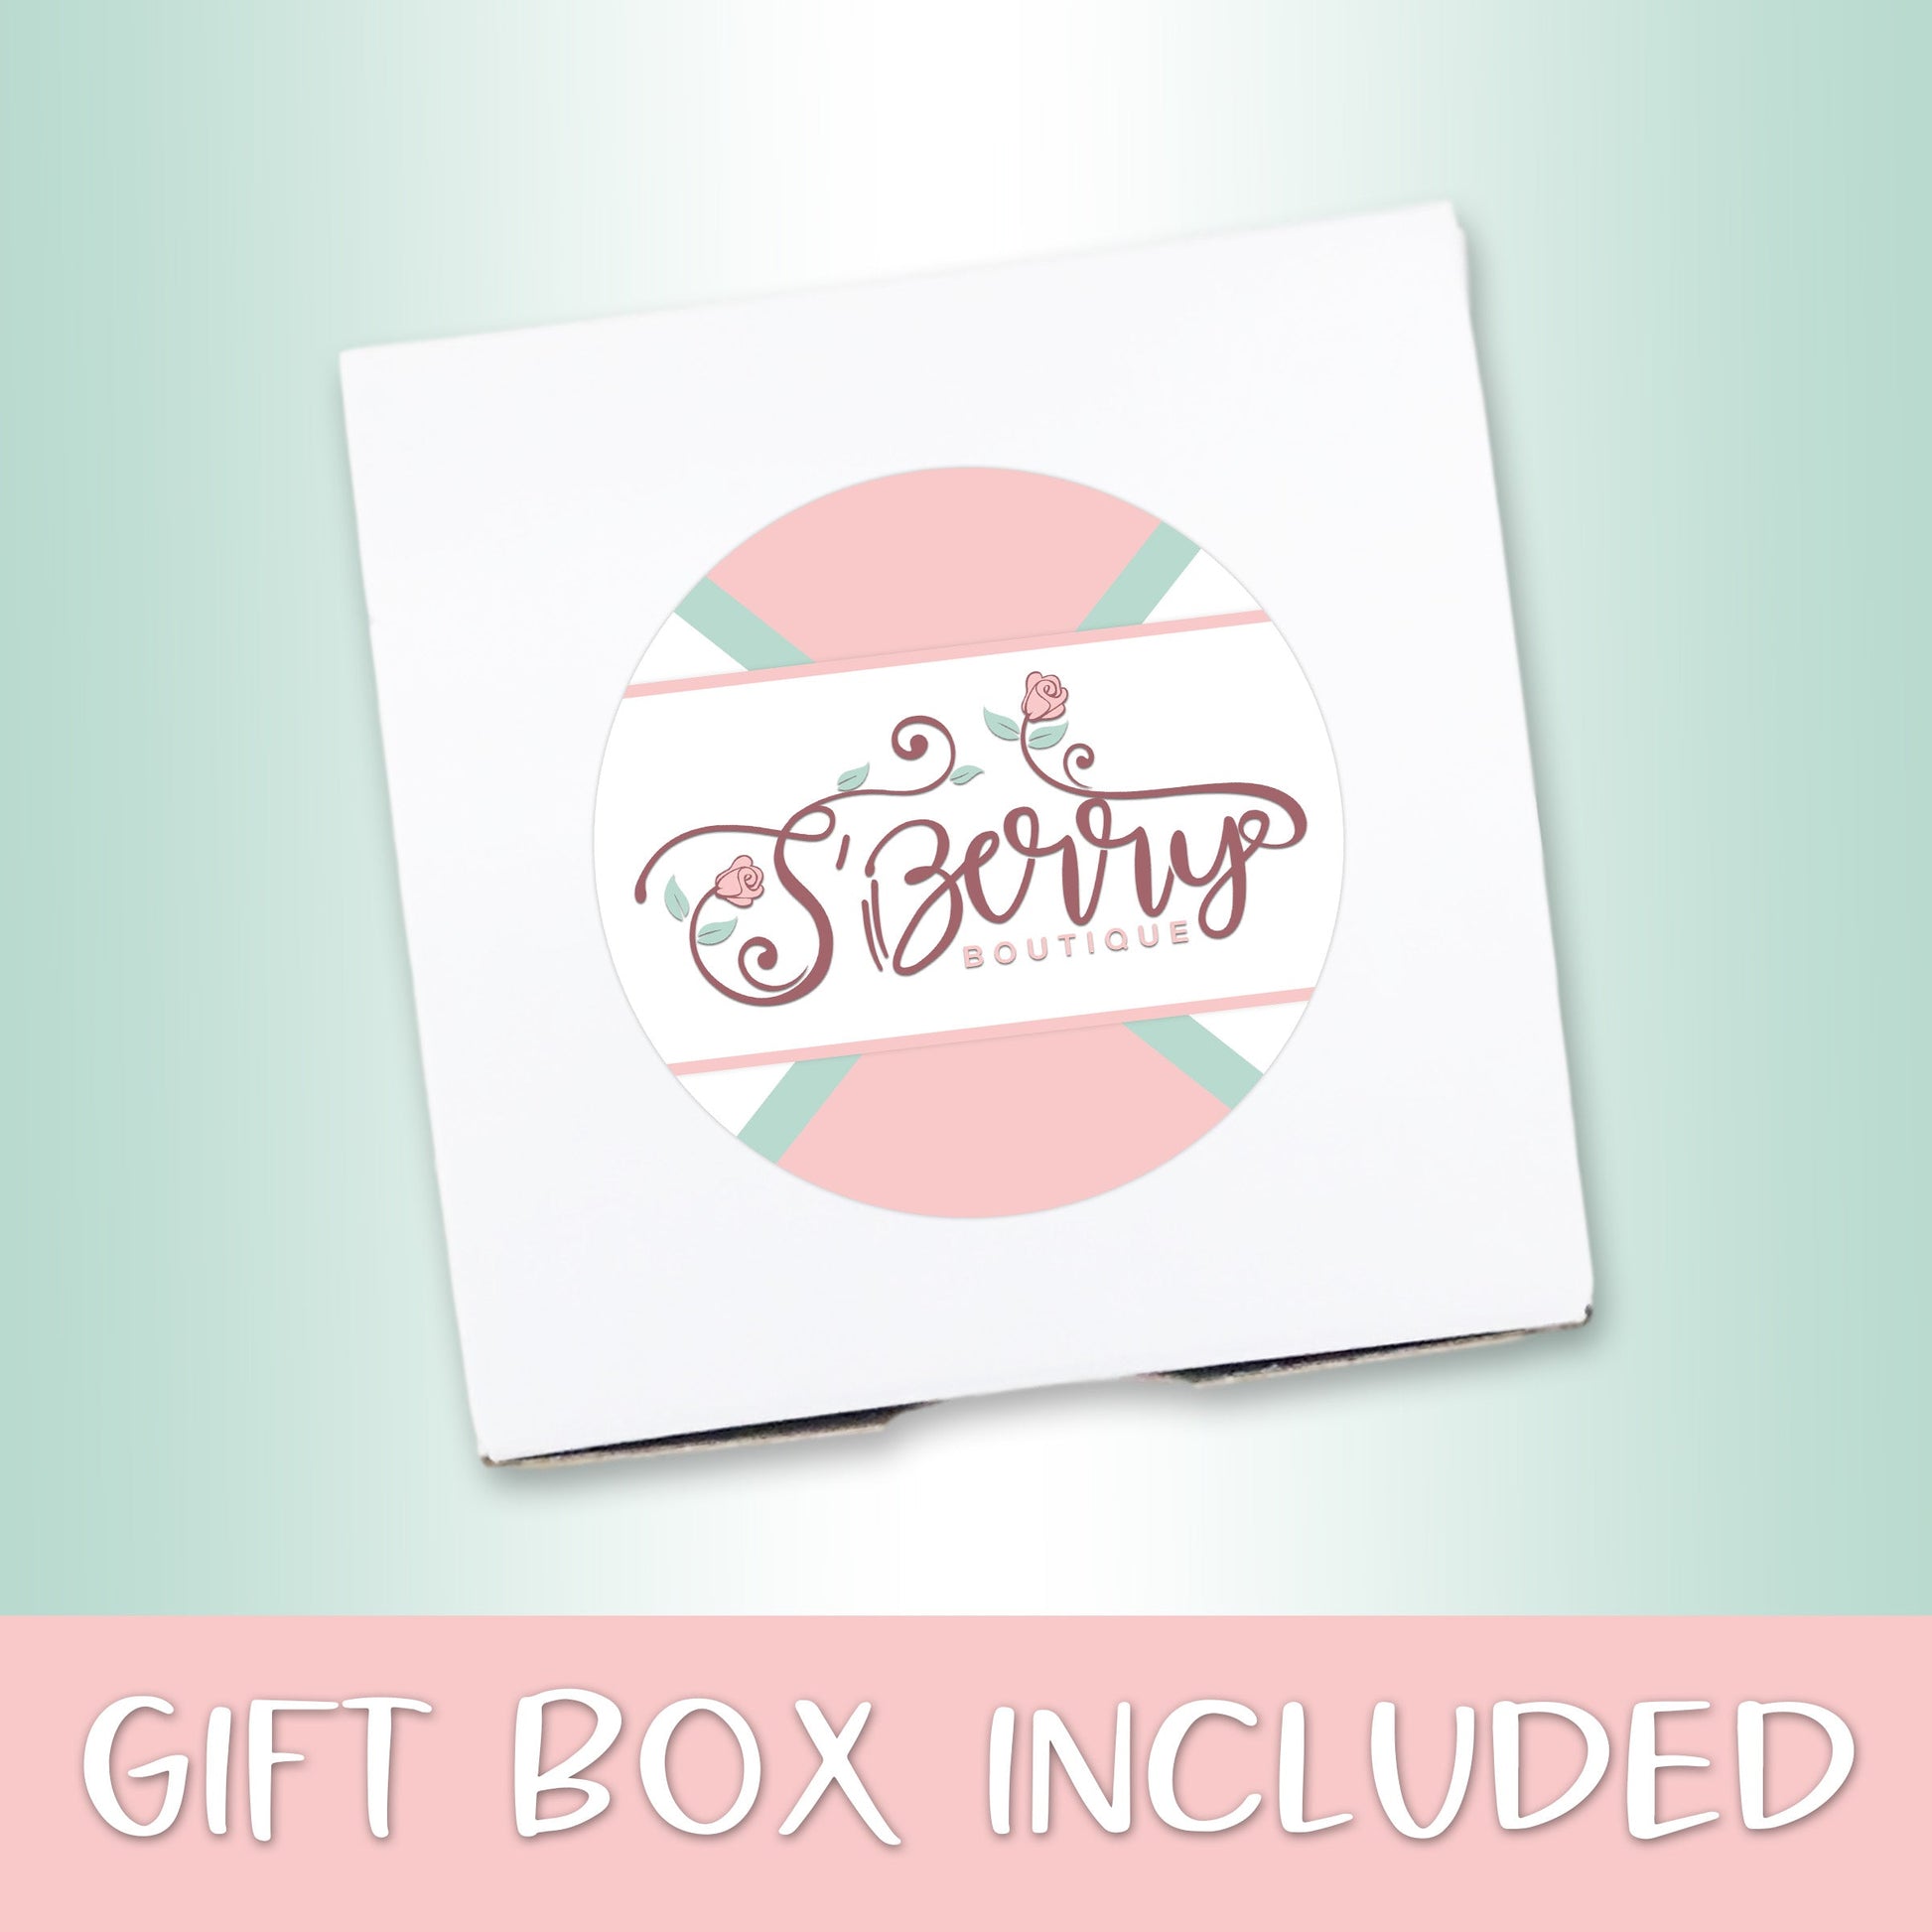 Create Your Own Puzzle - Floral Design - CYOP0139 | S'Berry Boutique